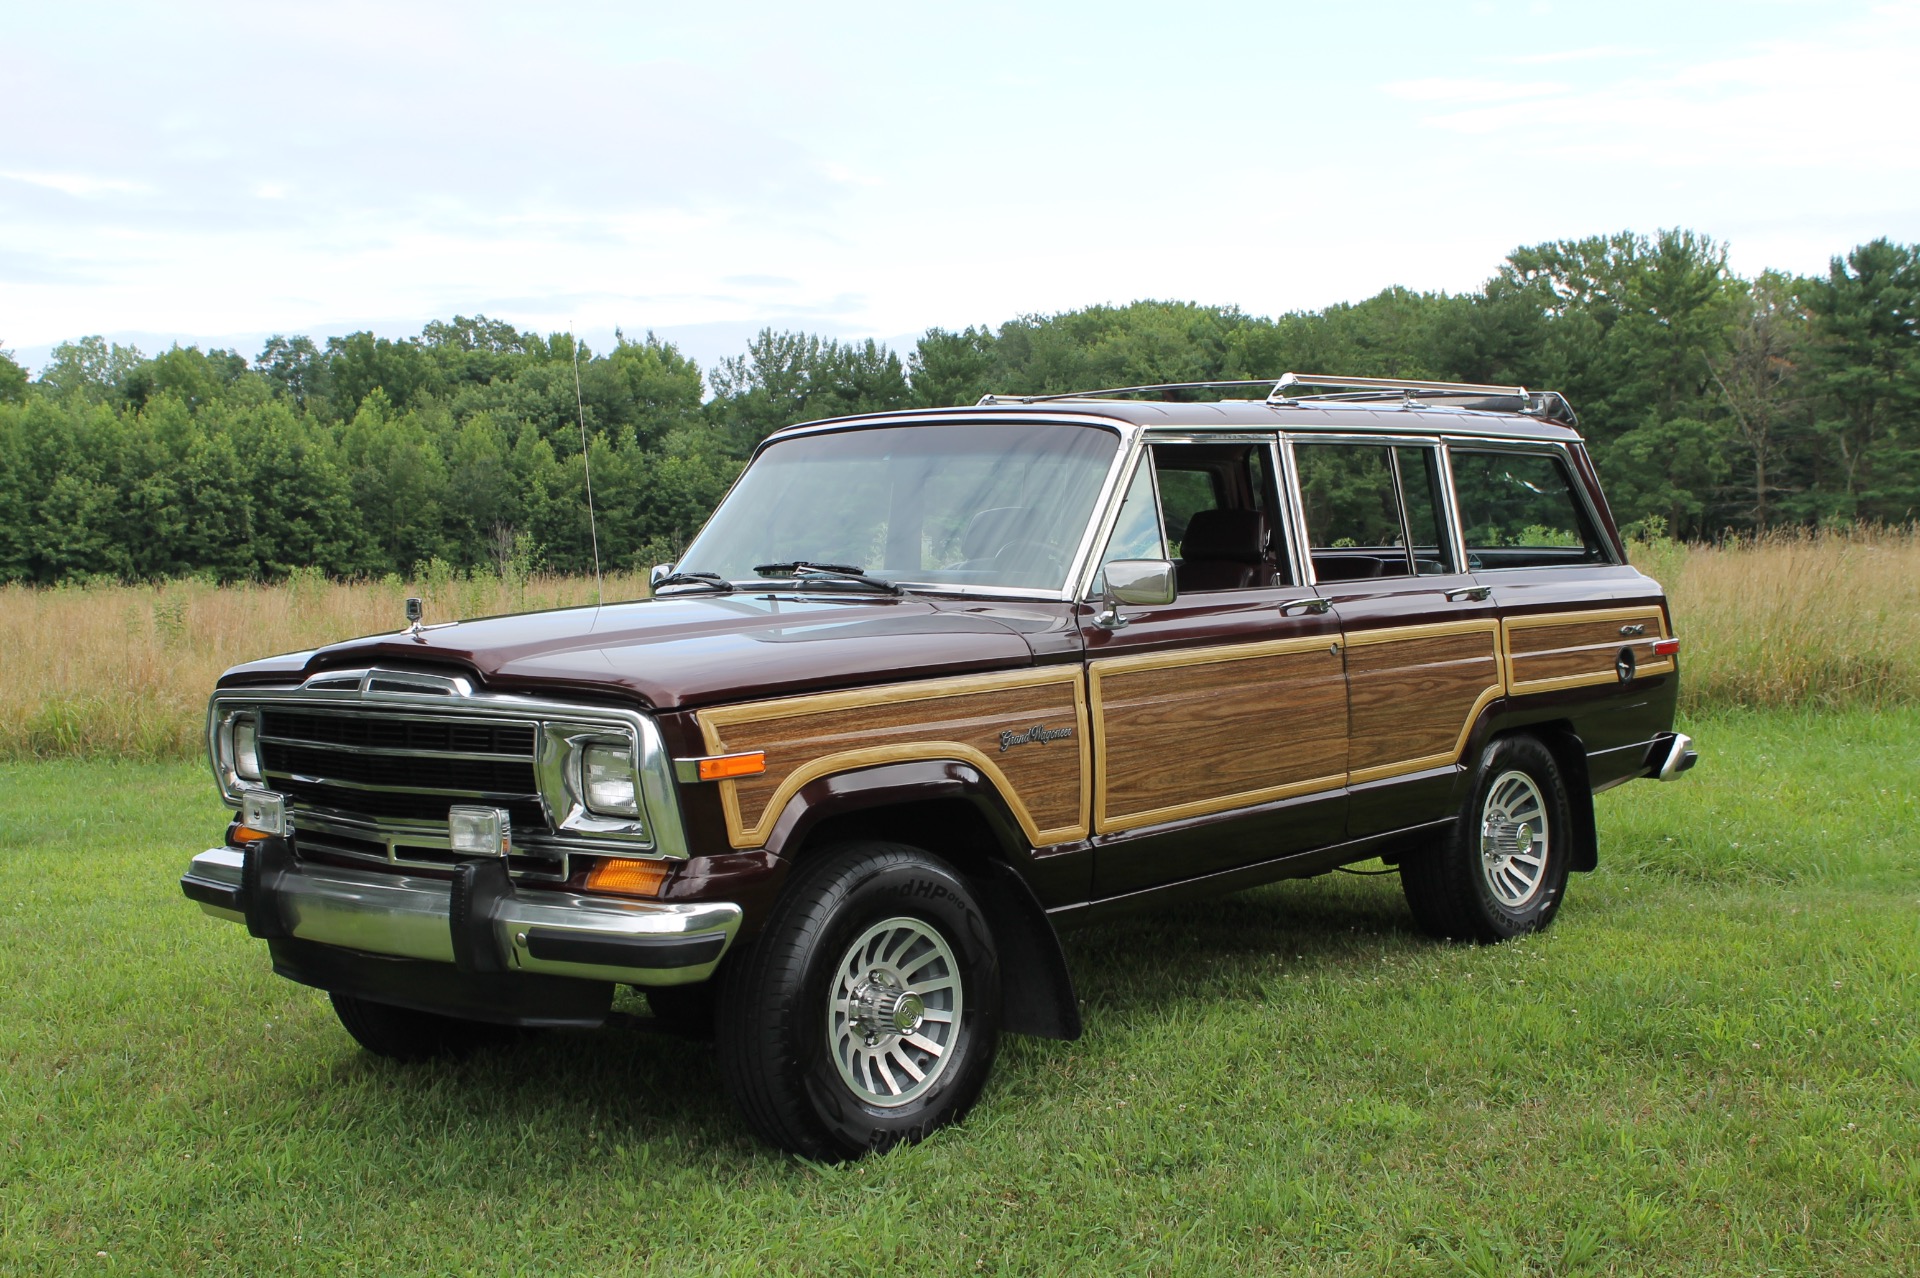 1987 Jeep Grand Wagoneer Veloce Picture Cars